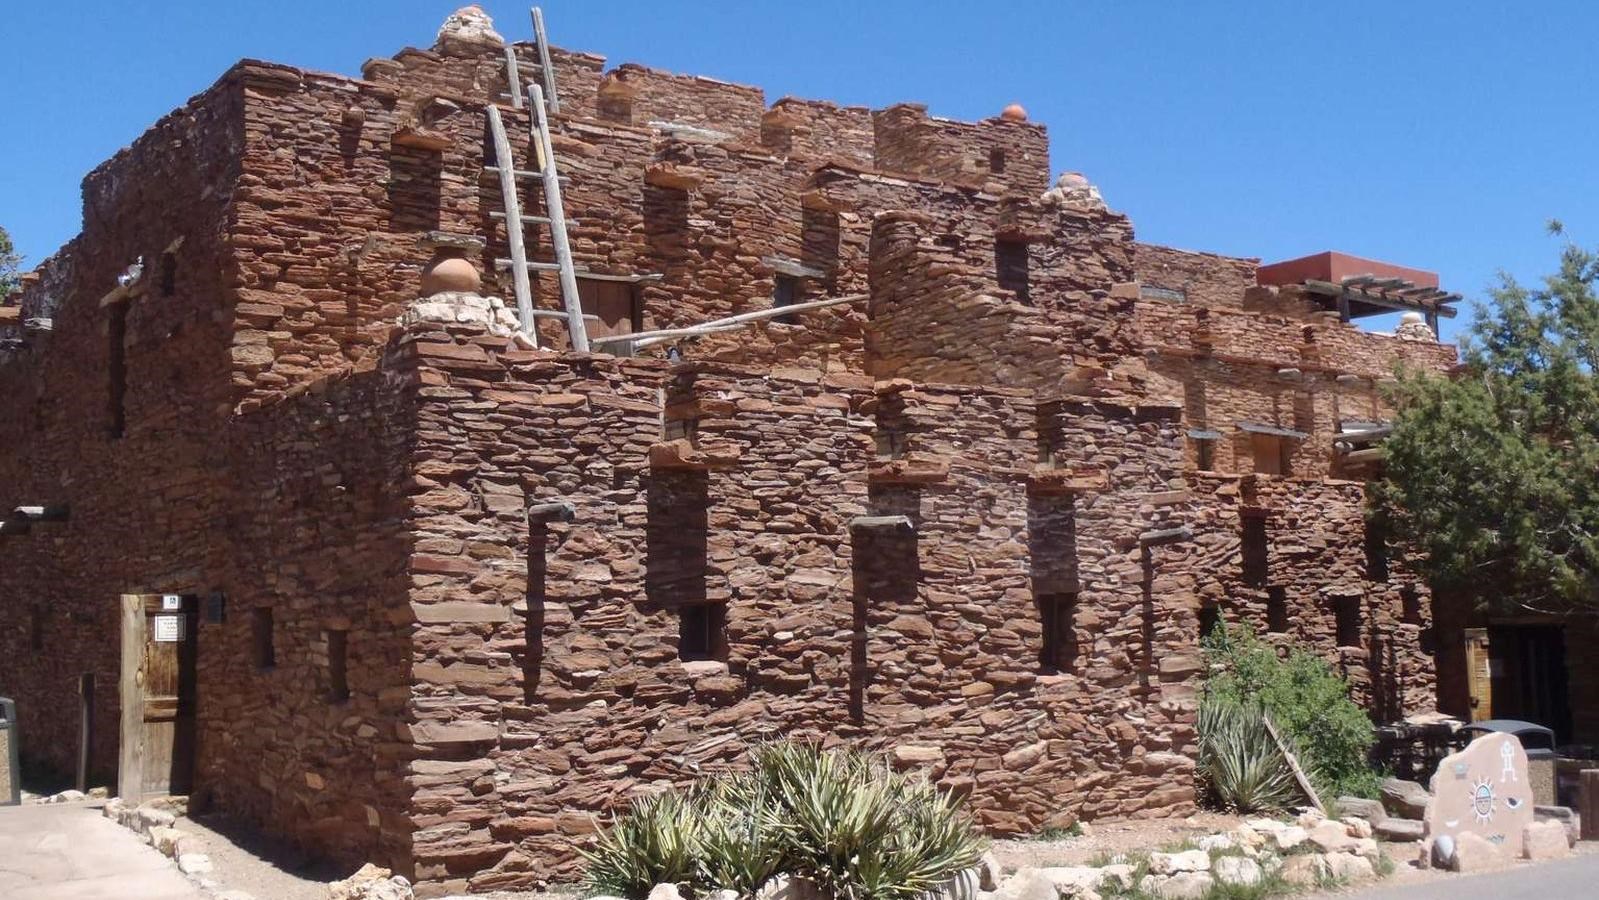 A two story red brick building with southwestern native american elements